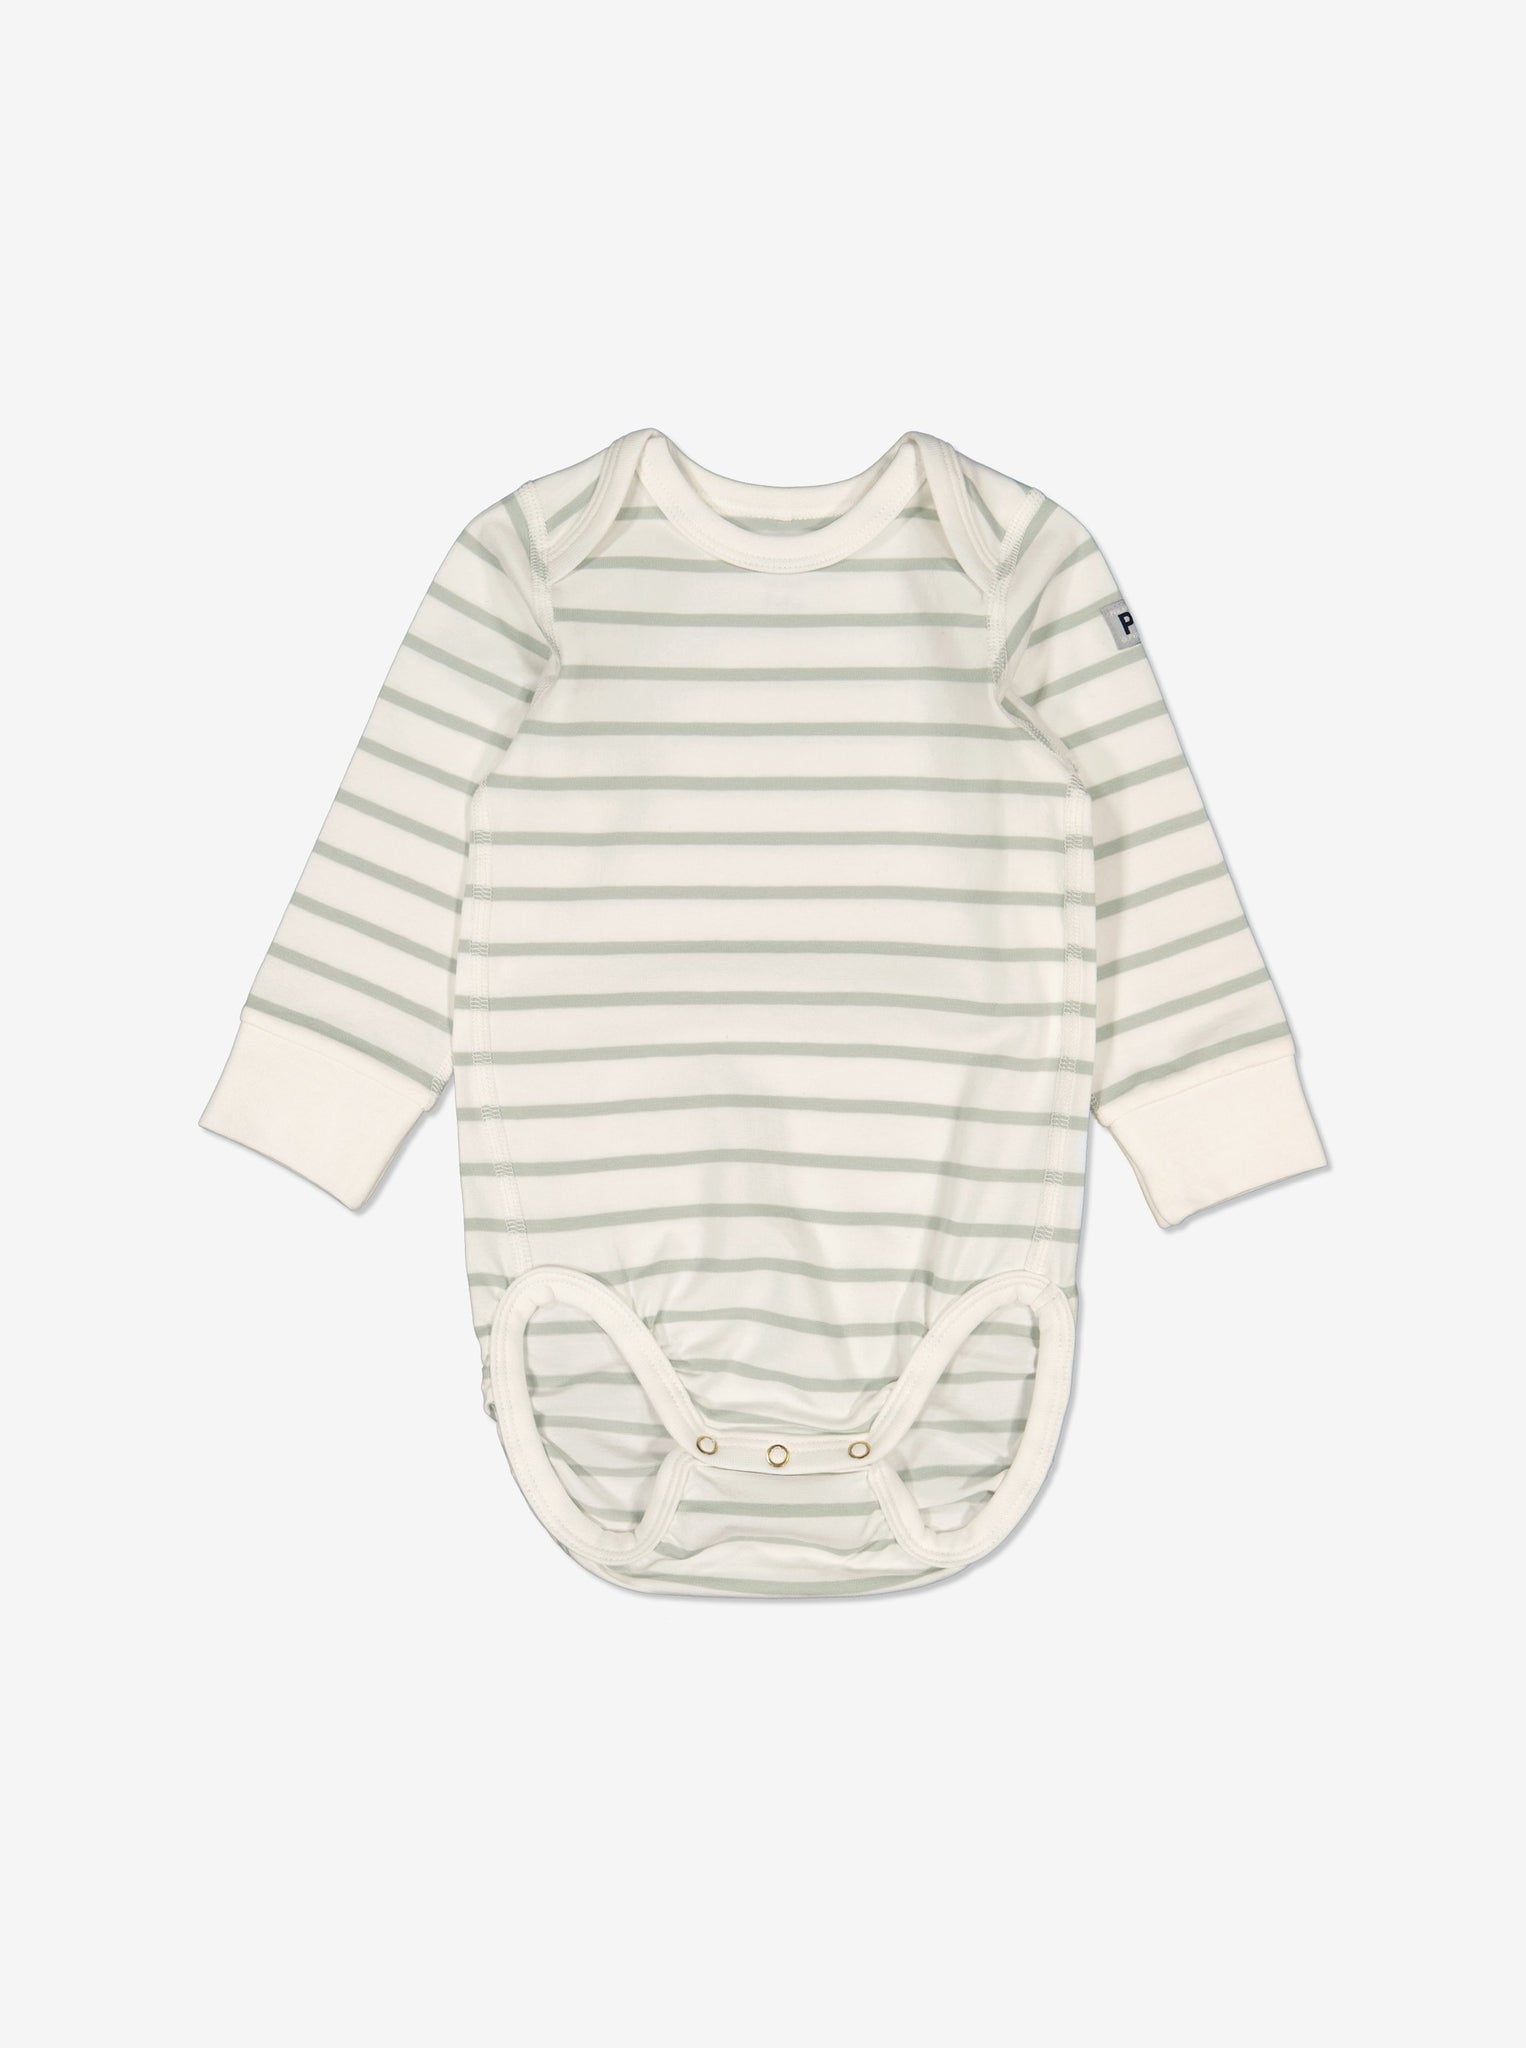  Organic Green Babygrow Two Pack from Polarn O. Pyret Kidswear. Made from sustainable materials.